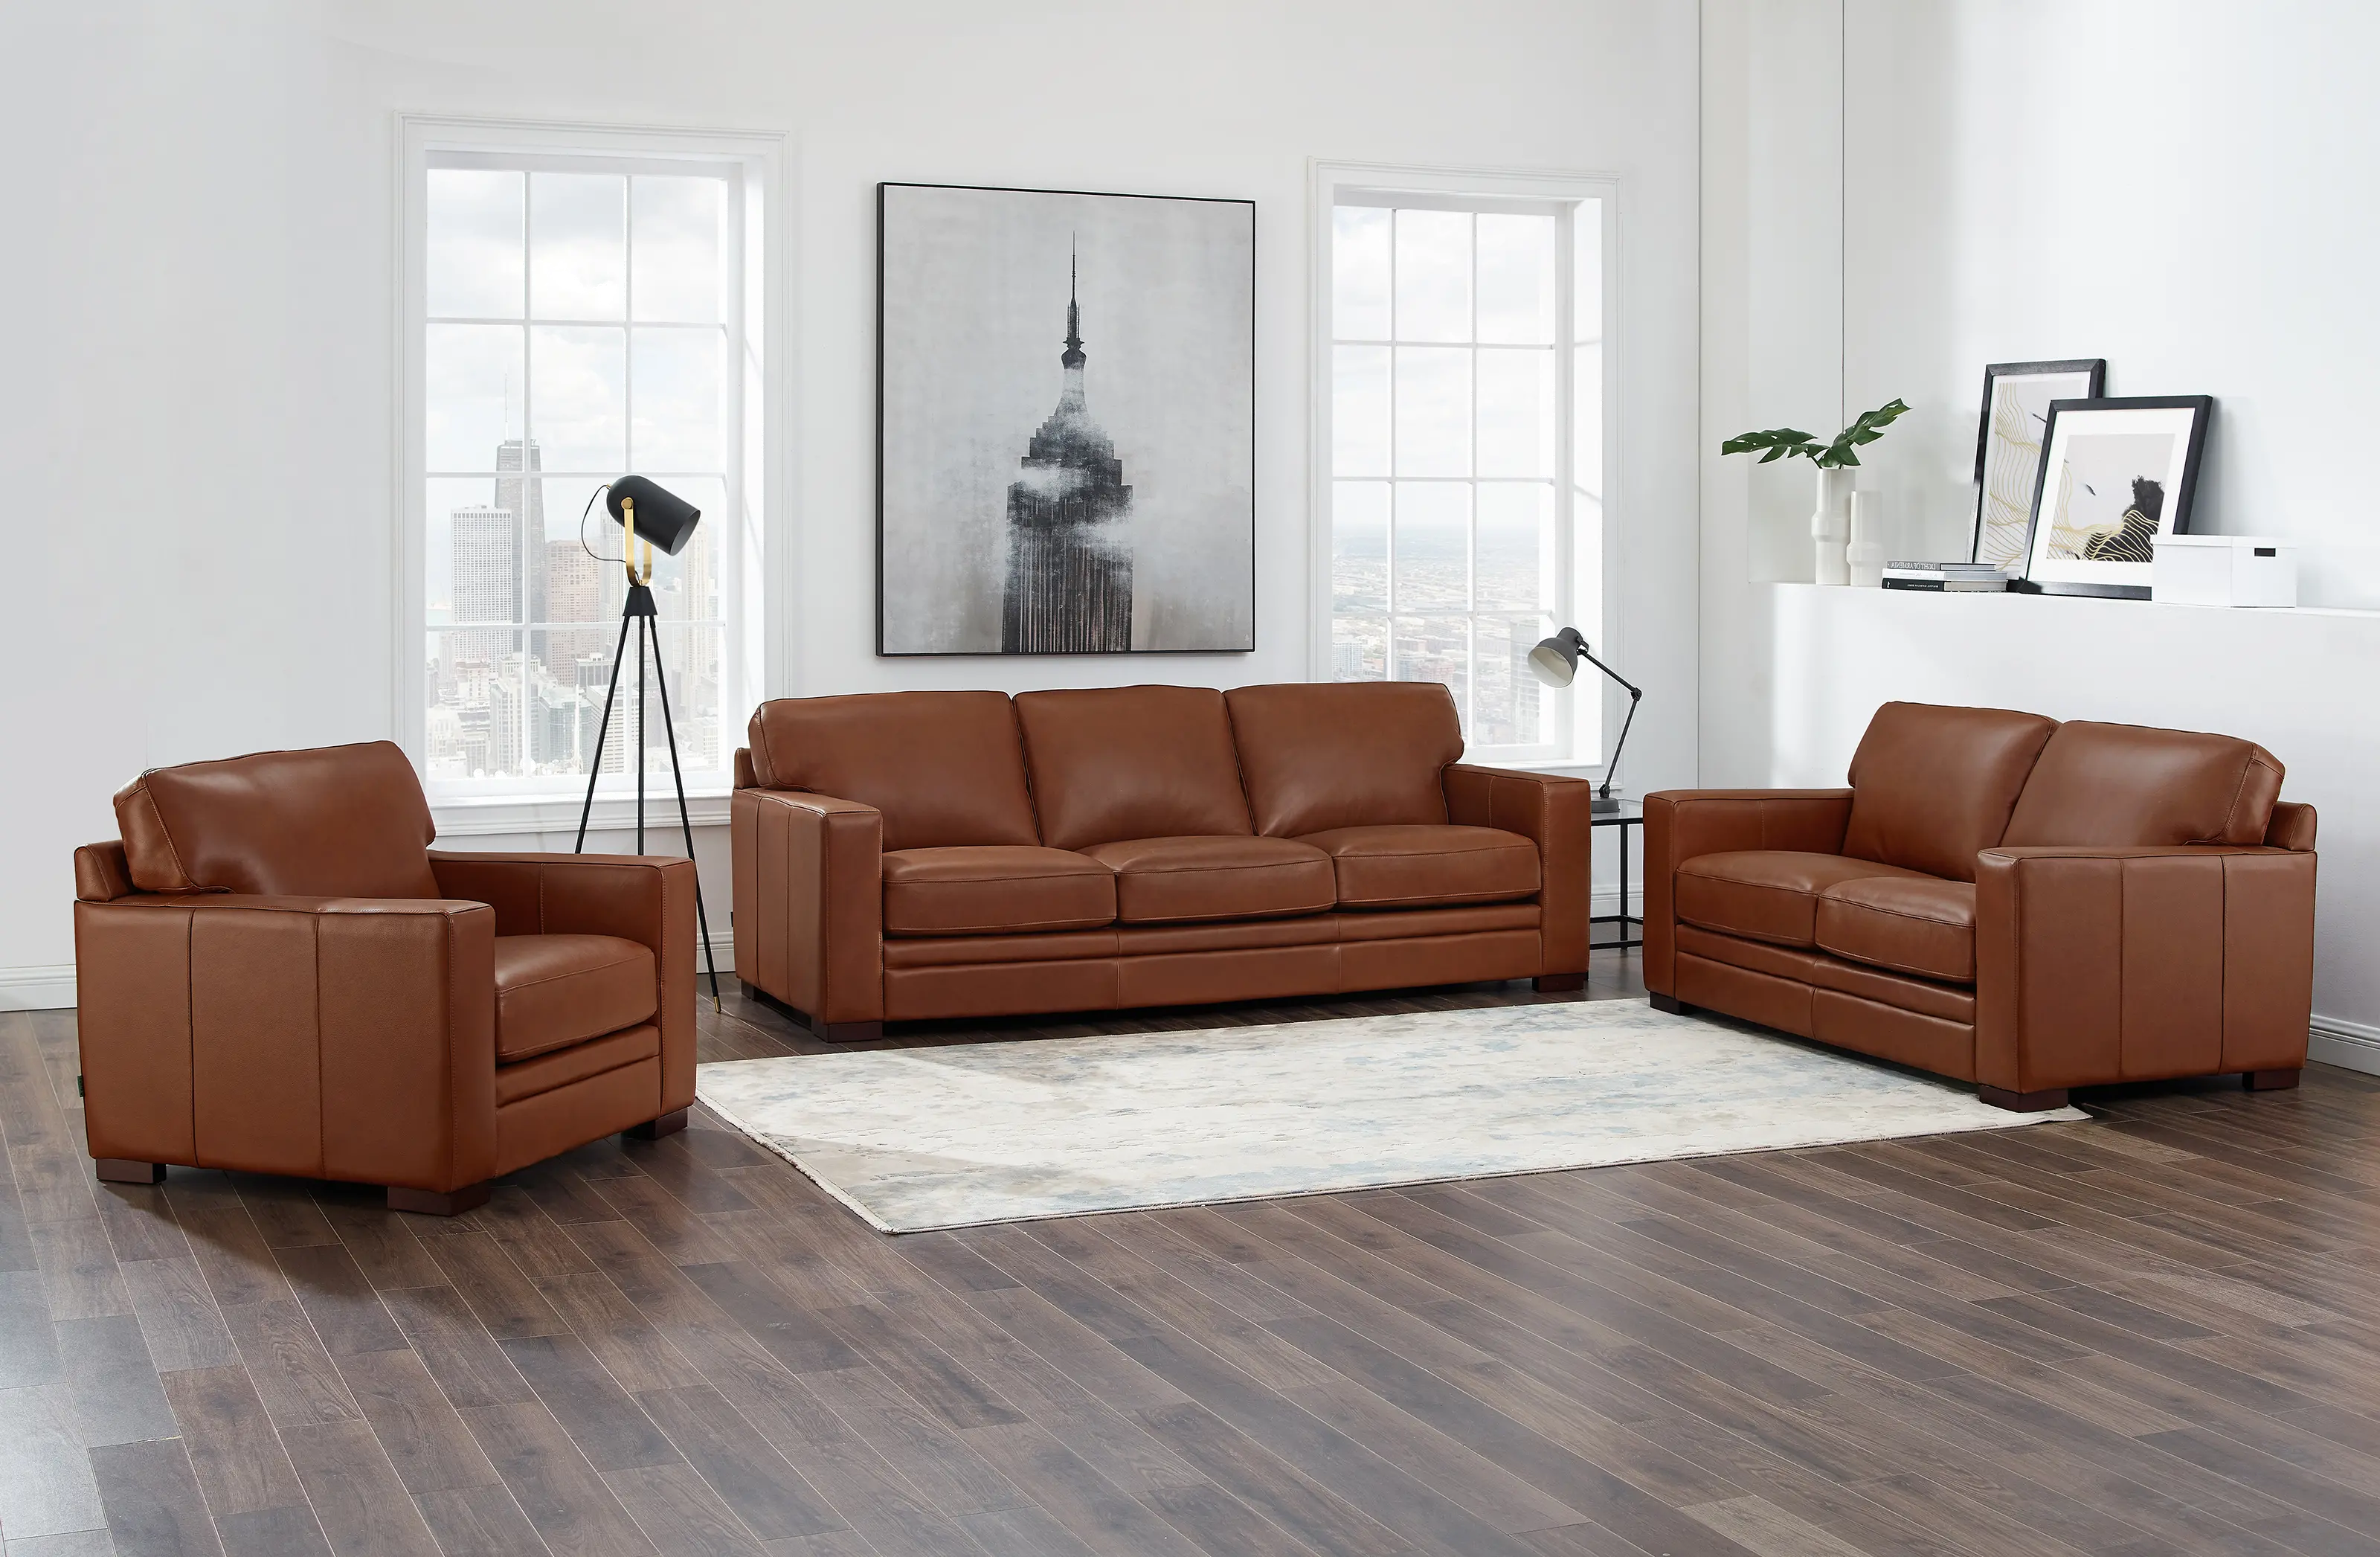 Chatsworth Brown Leather 3 Piece Living Room Set with Loveseat